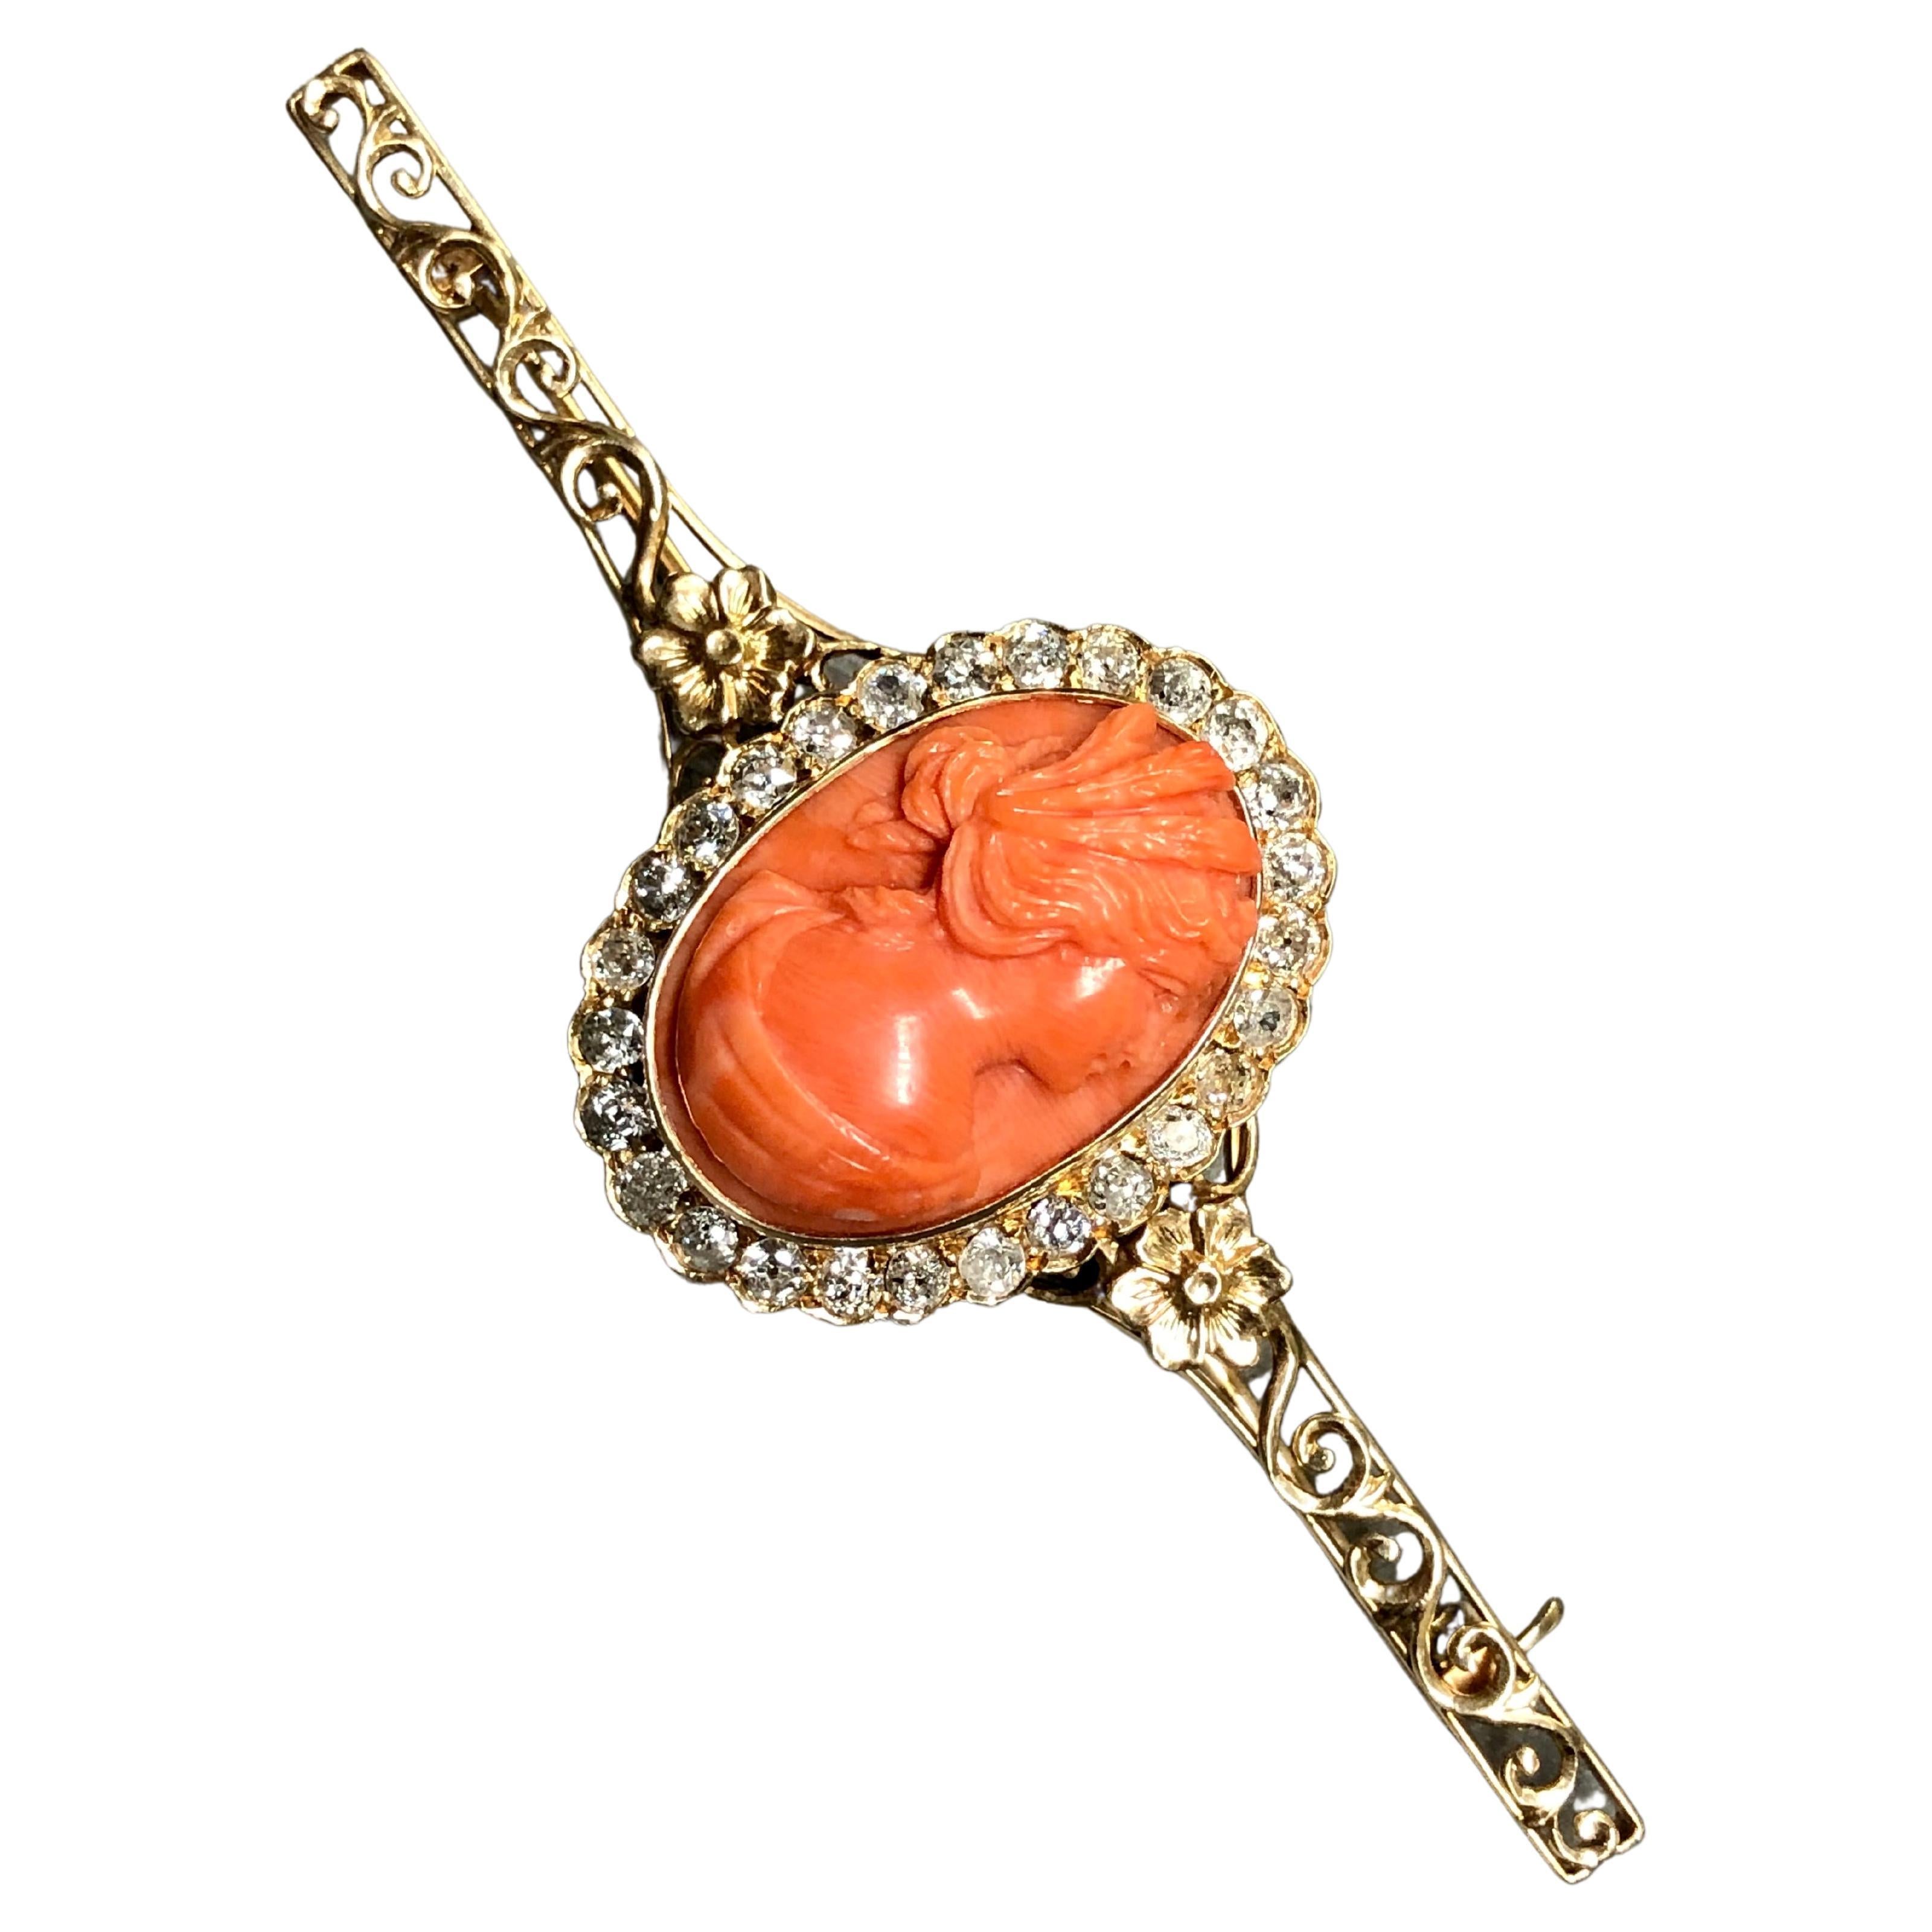 Antique Victorian Mine Cut Diamond Coral Cameo Brooch Pin 2.16cttw For Sale